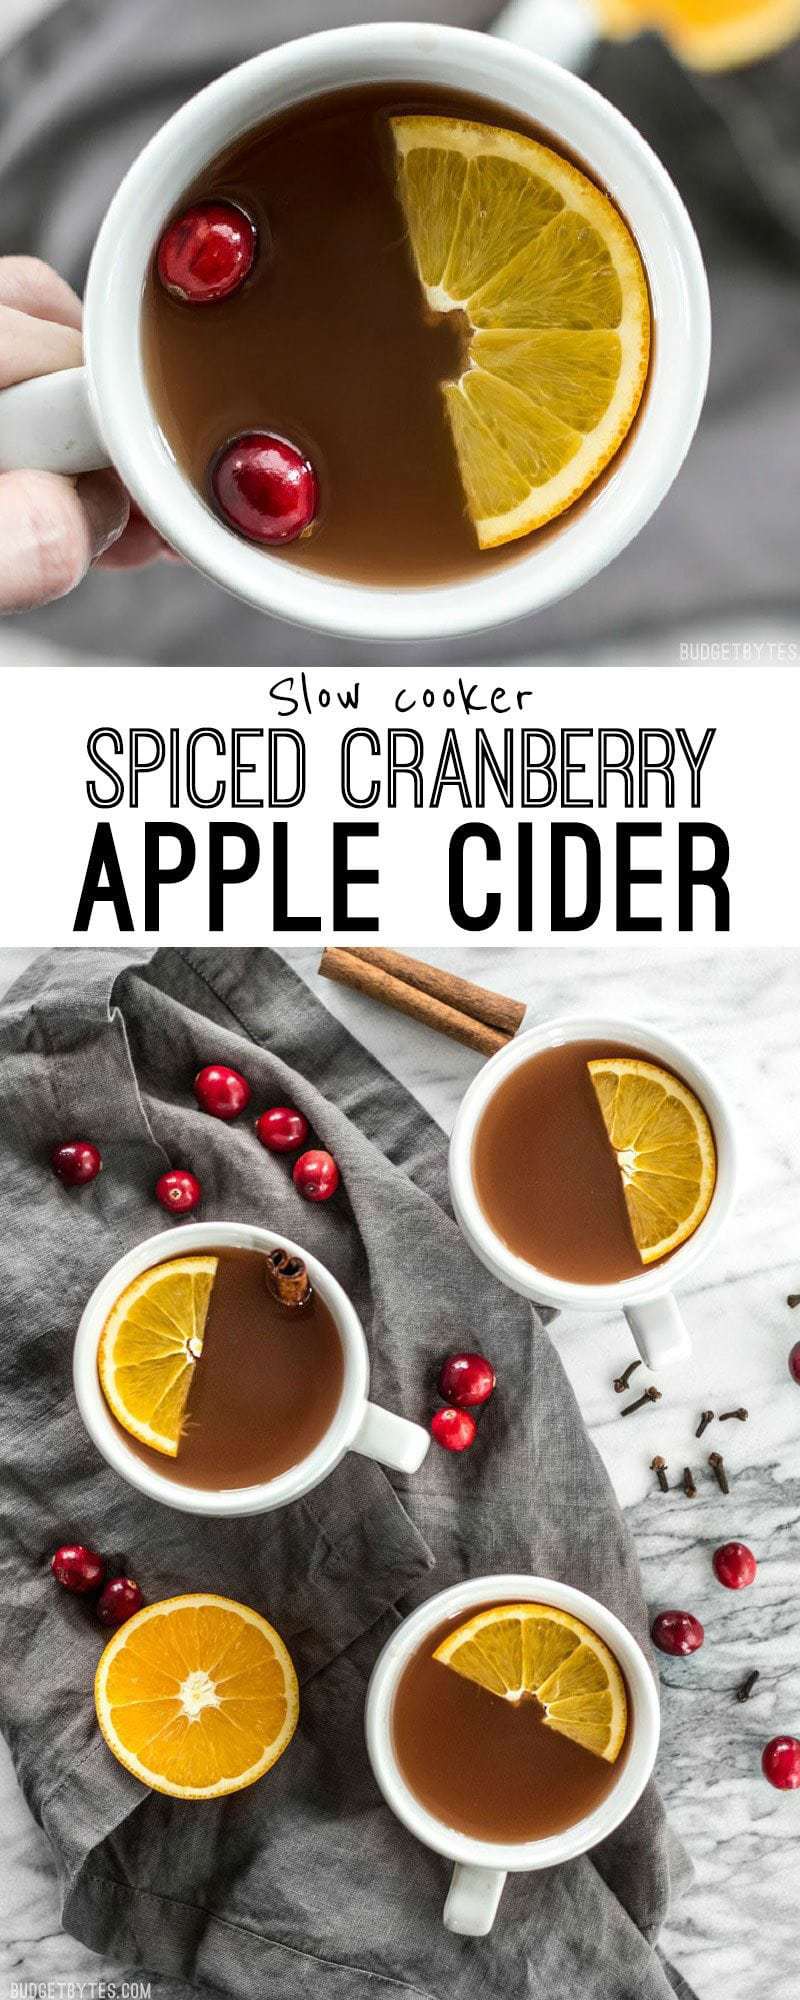 Slow Cooker Spiced Cranberry Apple Cider is an easy and festive drink for all your holiday party guests. BudgetBytes.com